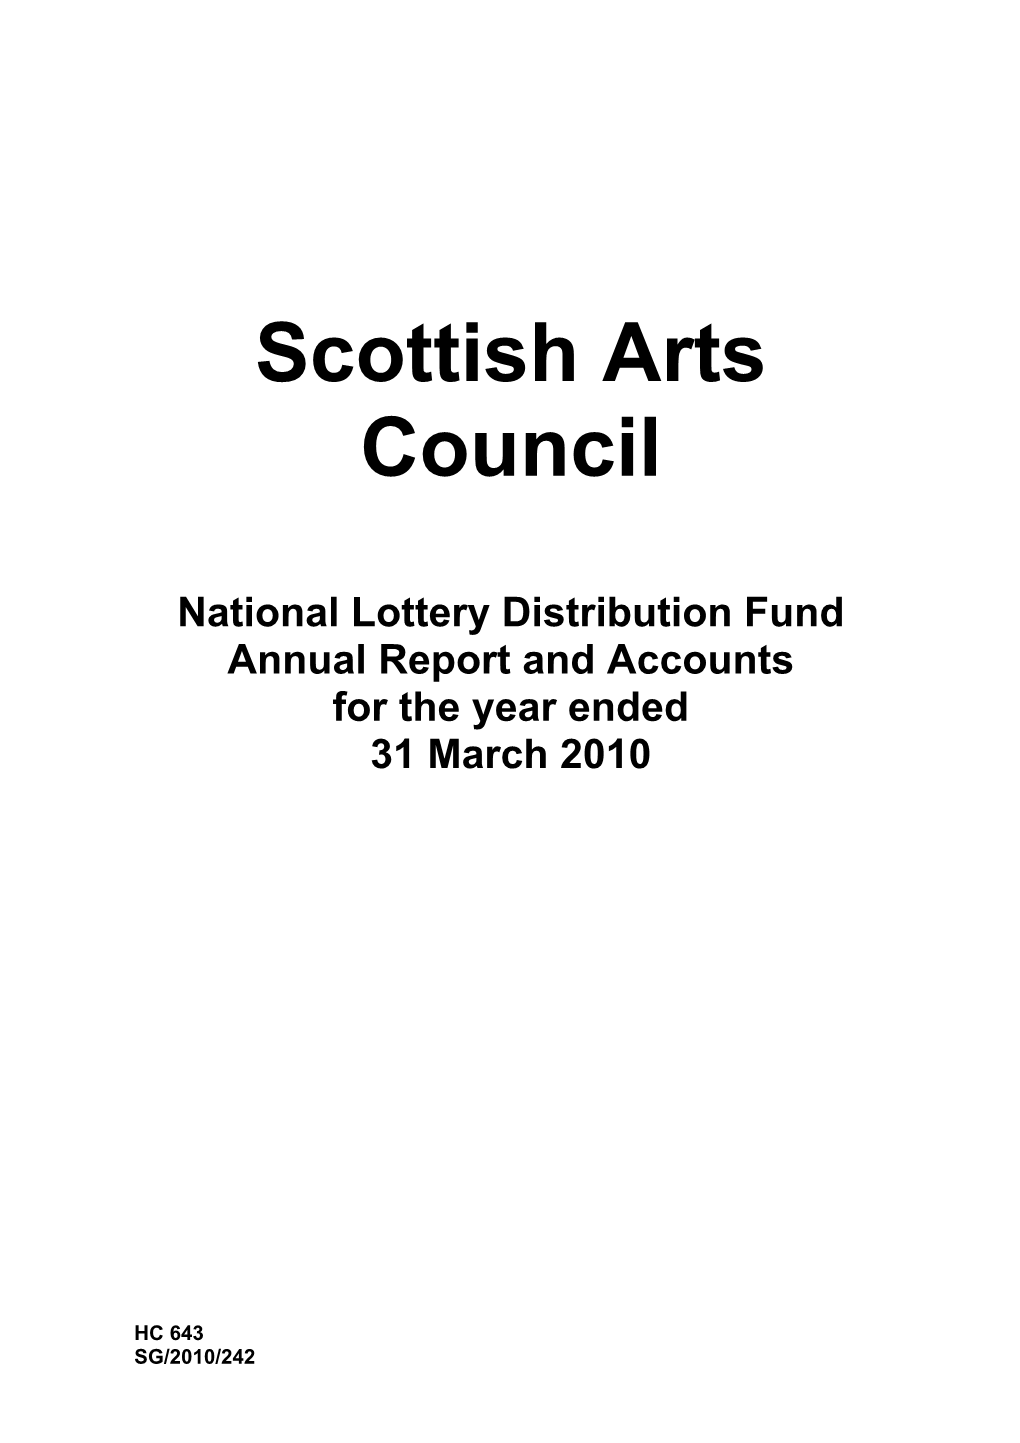 Scottish Arts Council National Lottery Distribution Fund Annual Report and Accounts for the Year Ended 31 March 2010